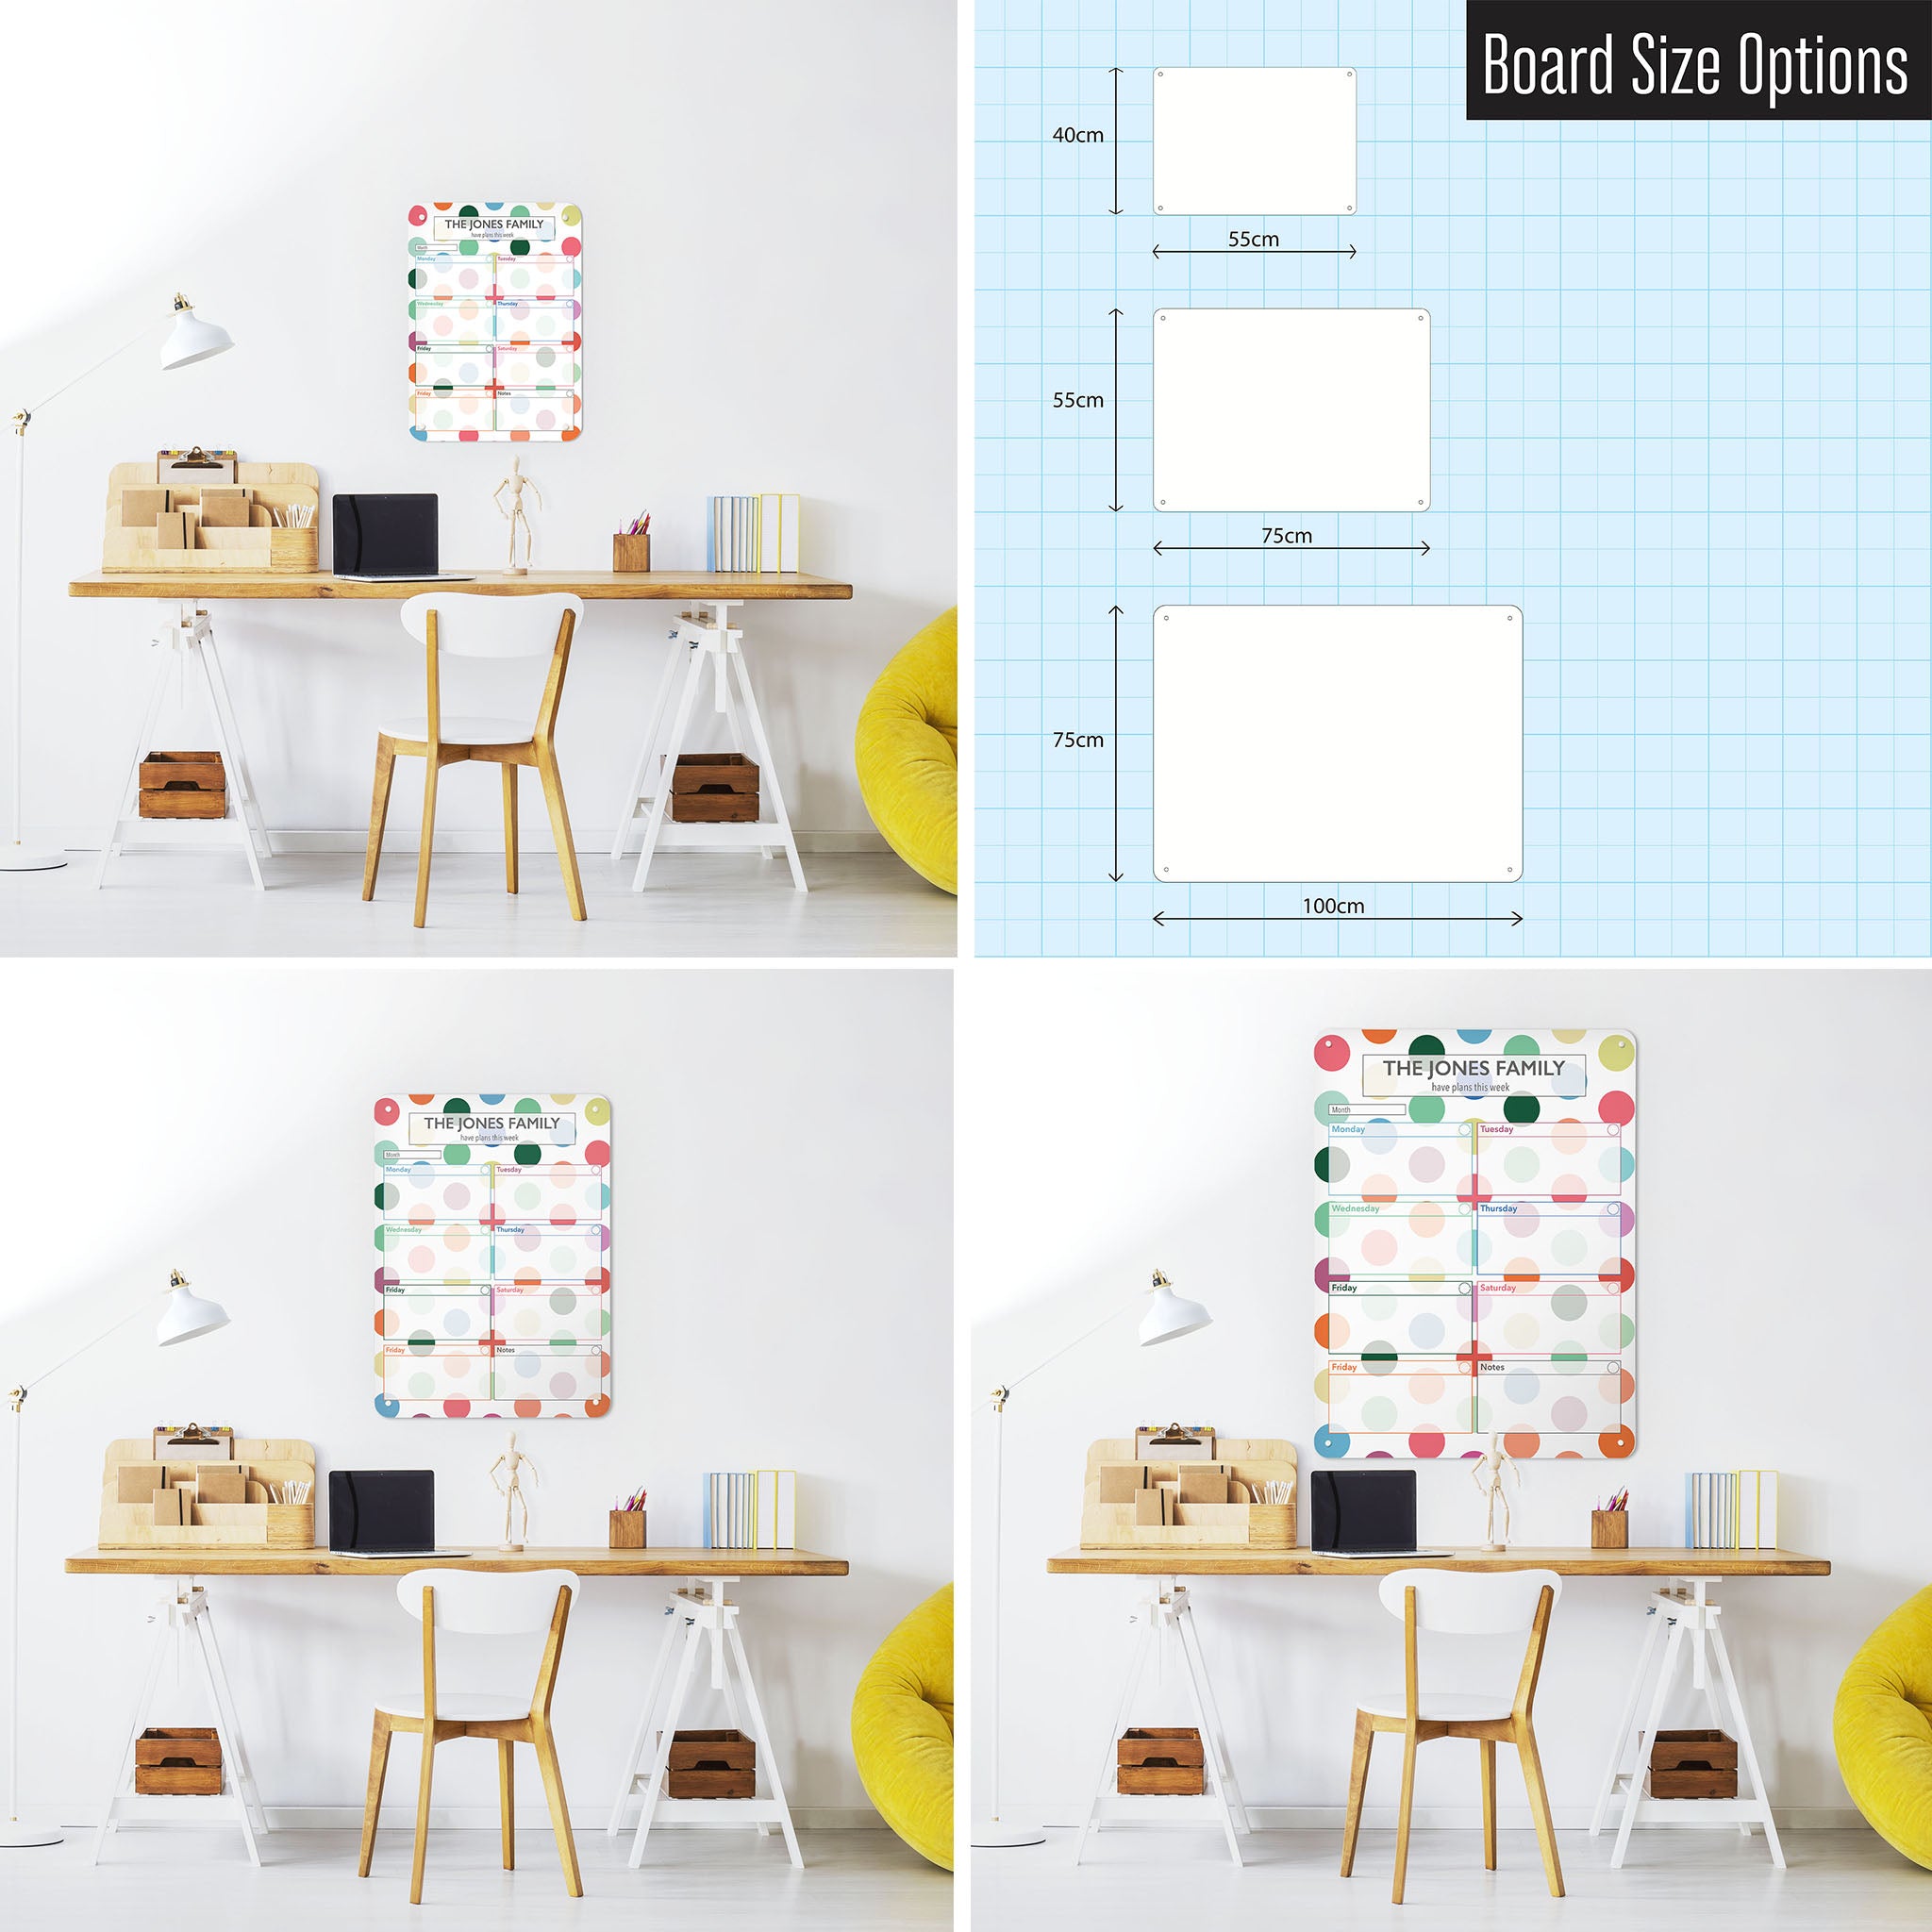 Three photographs of a workspace interior and a diagram to show size comparisons of a portrait spots design weekly planner personalised dry wipe magnetic notice board